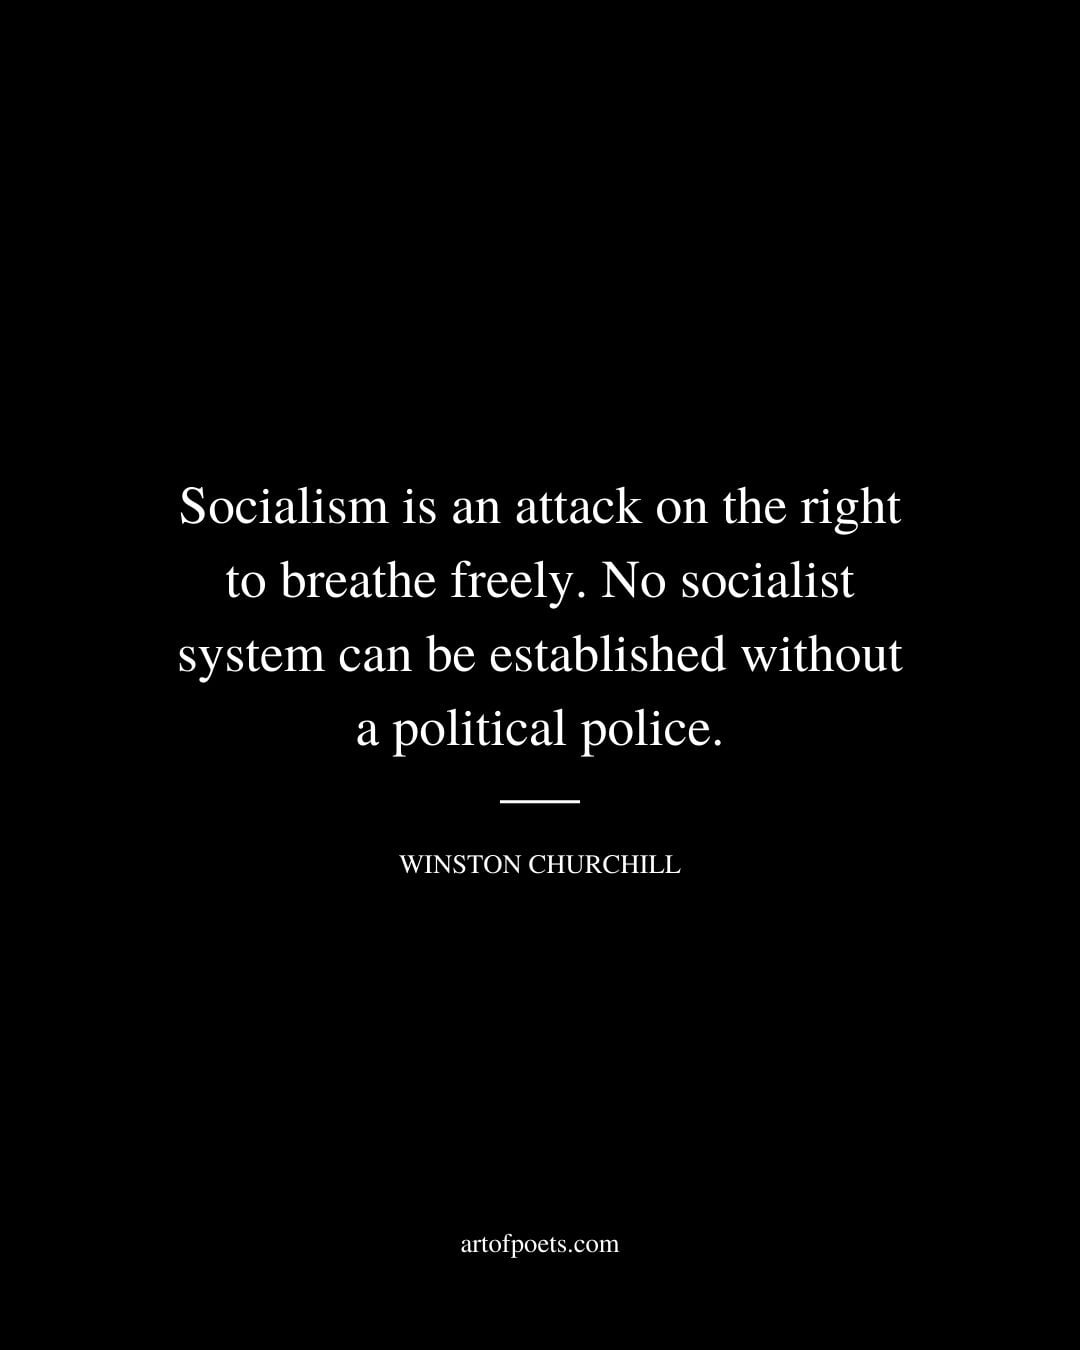 Socialism is an attack on the right to breathe freely. No socialist system can be established without a political police